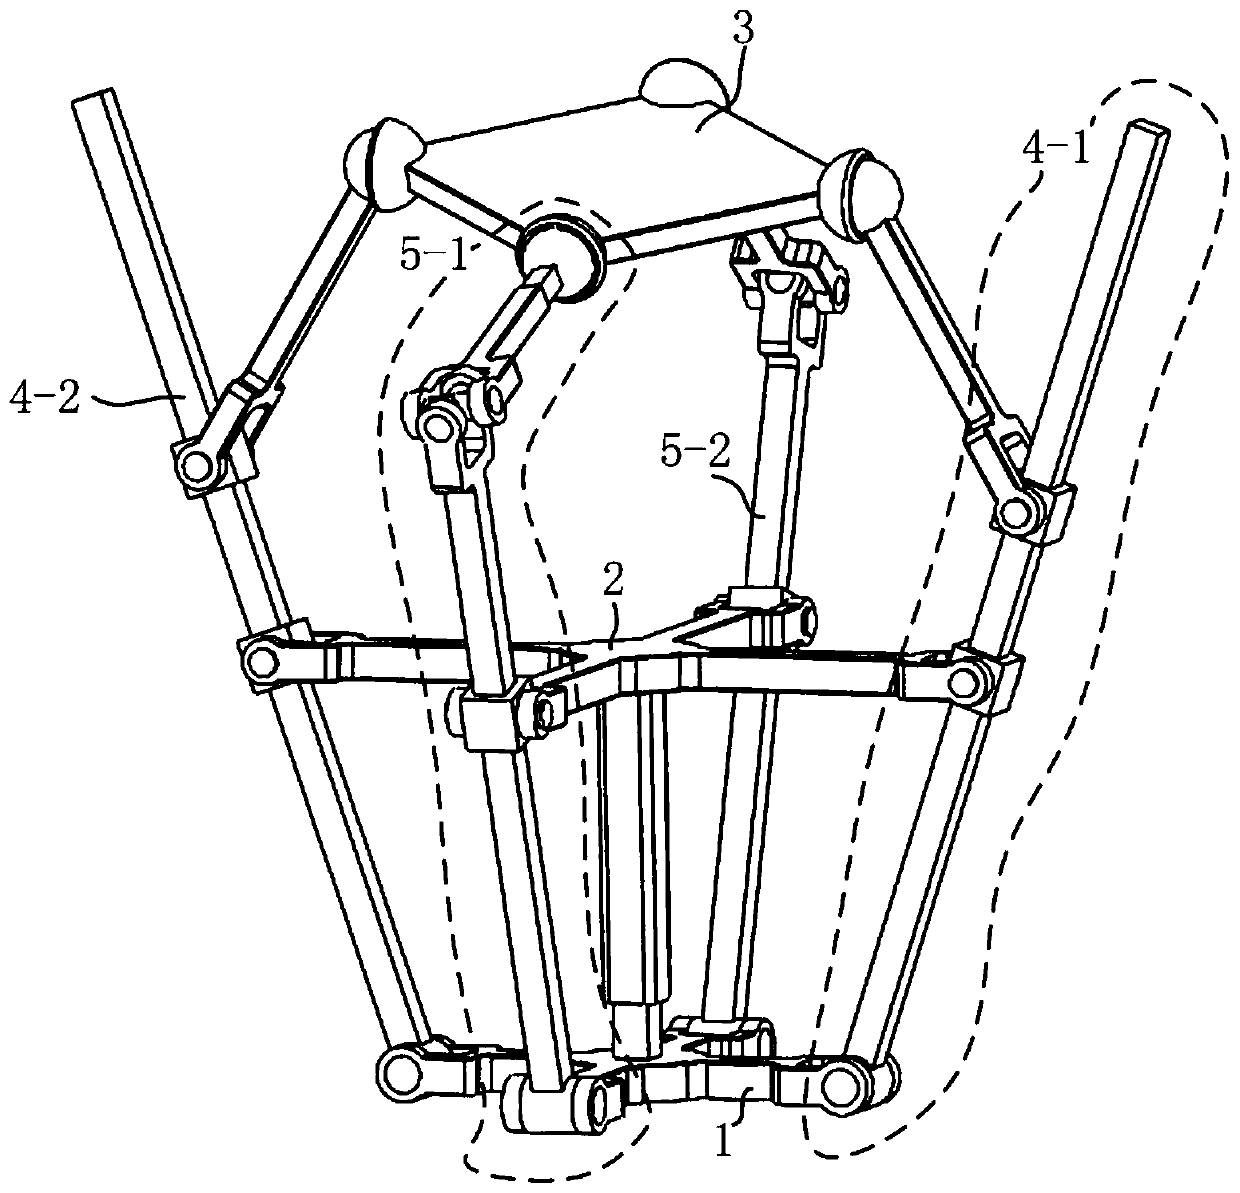 A Structural Redundant Parallel Mechanism with Two Rotations and Two Movements